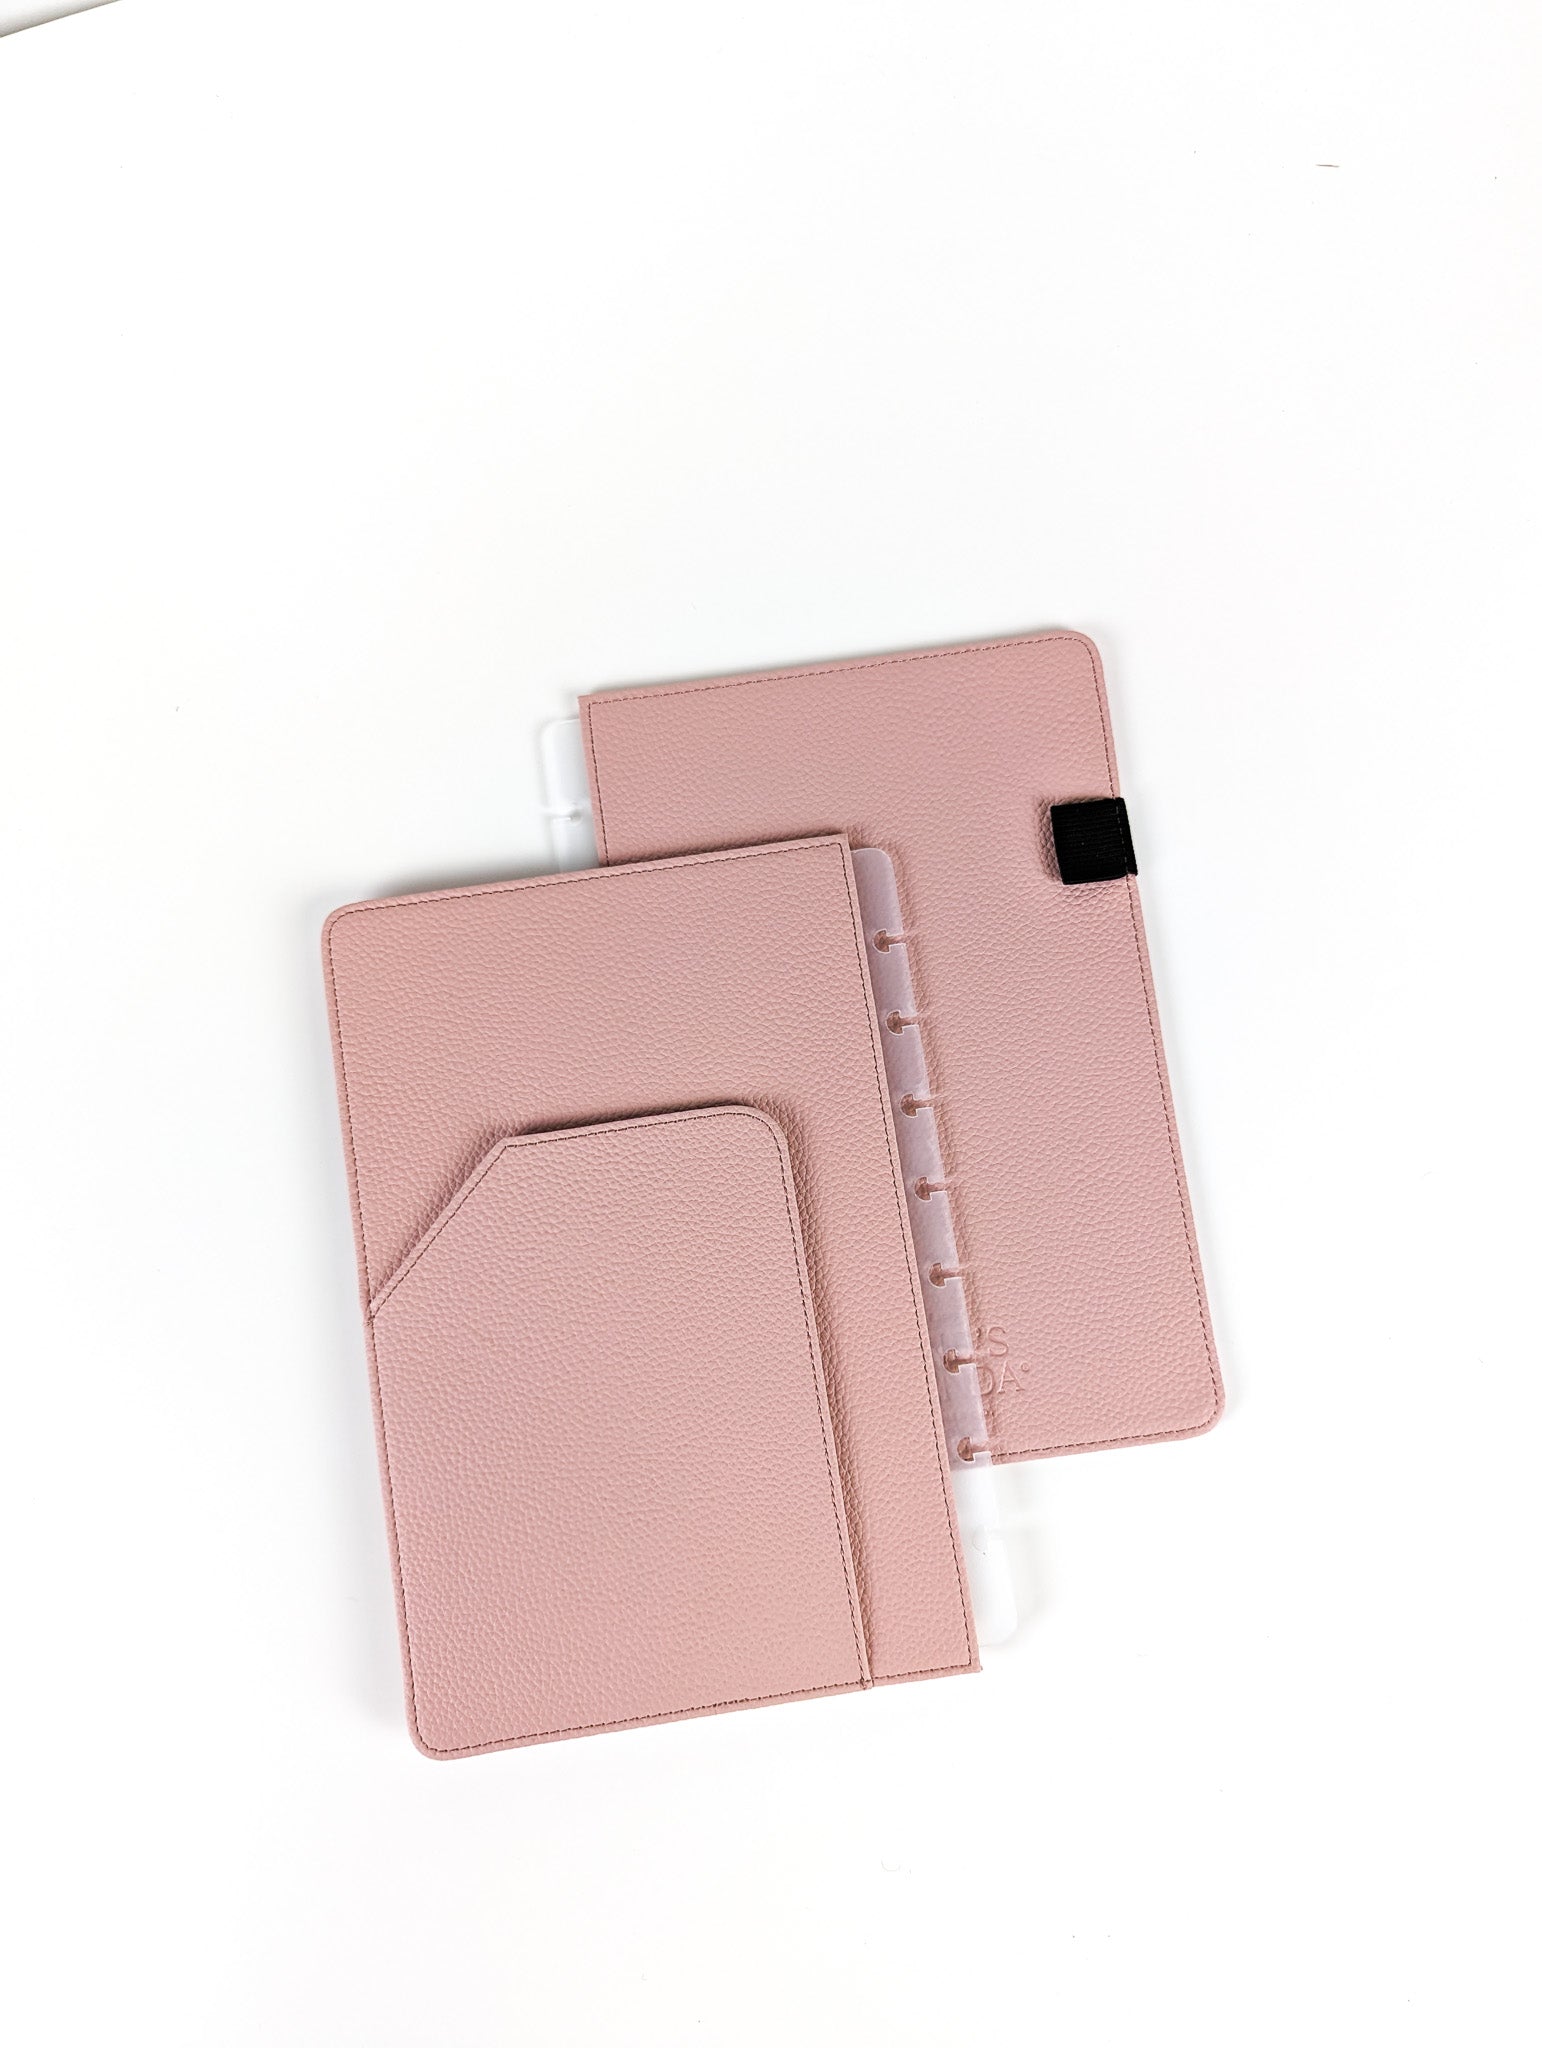 Blush pink vegan leather discbound planner cover by Jane's Agenda.